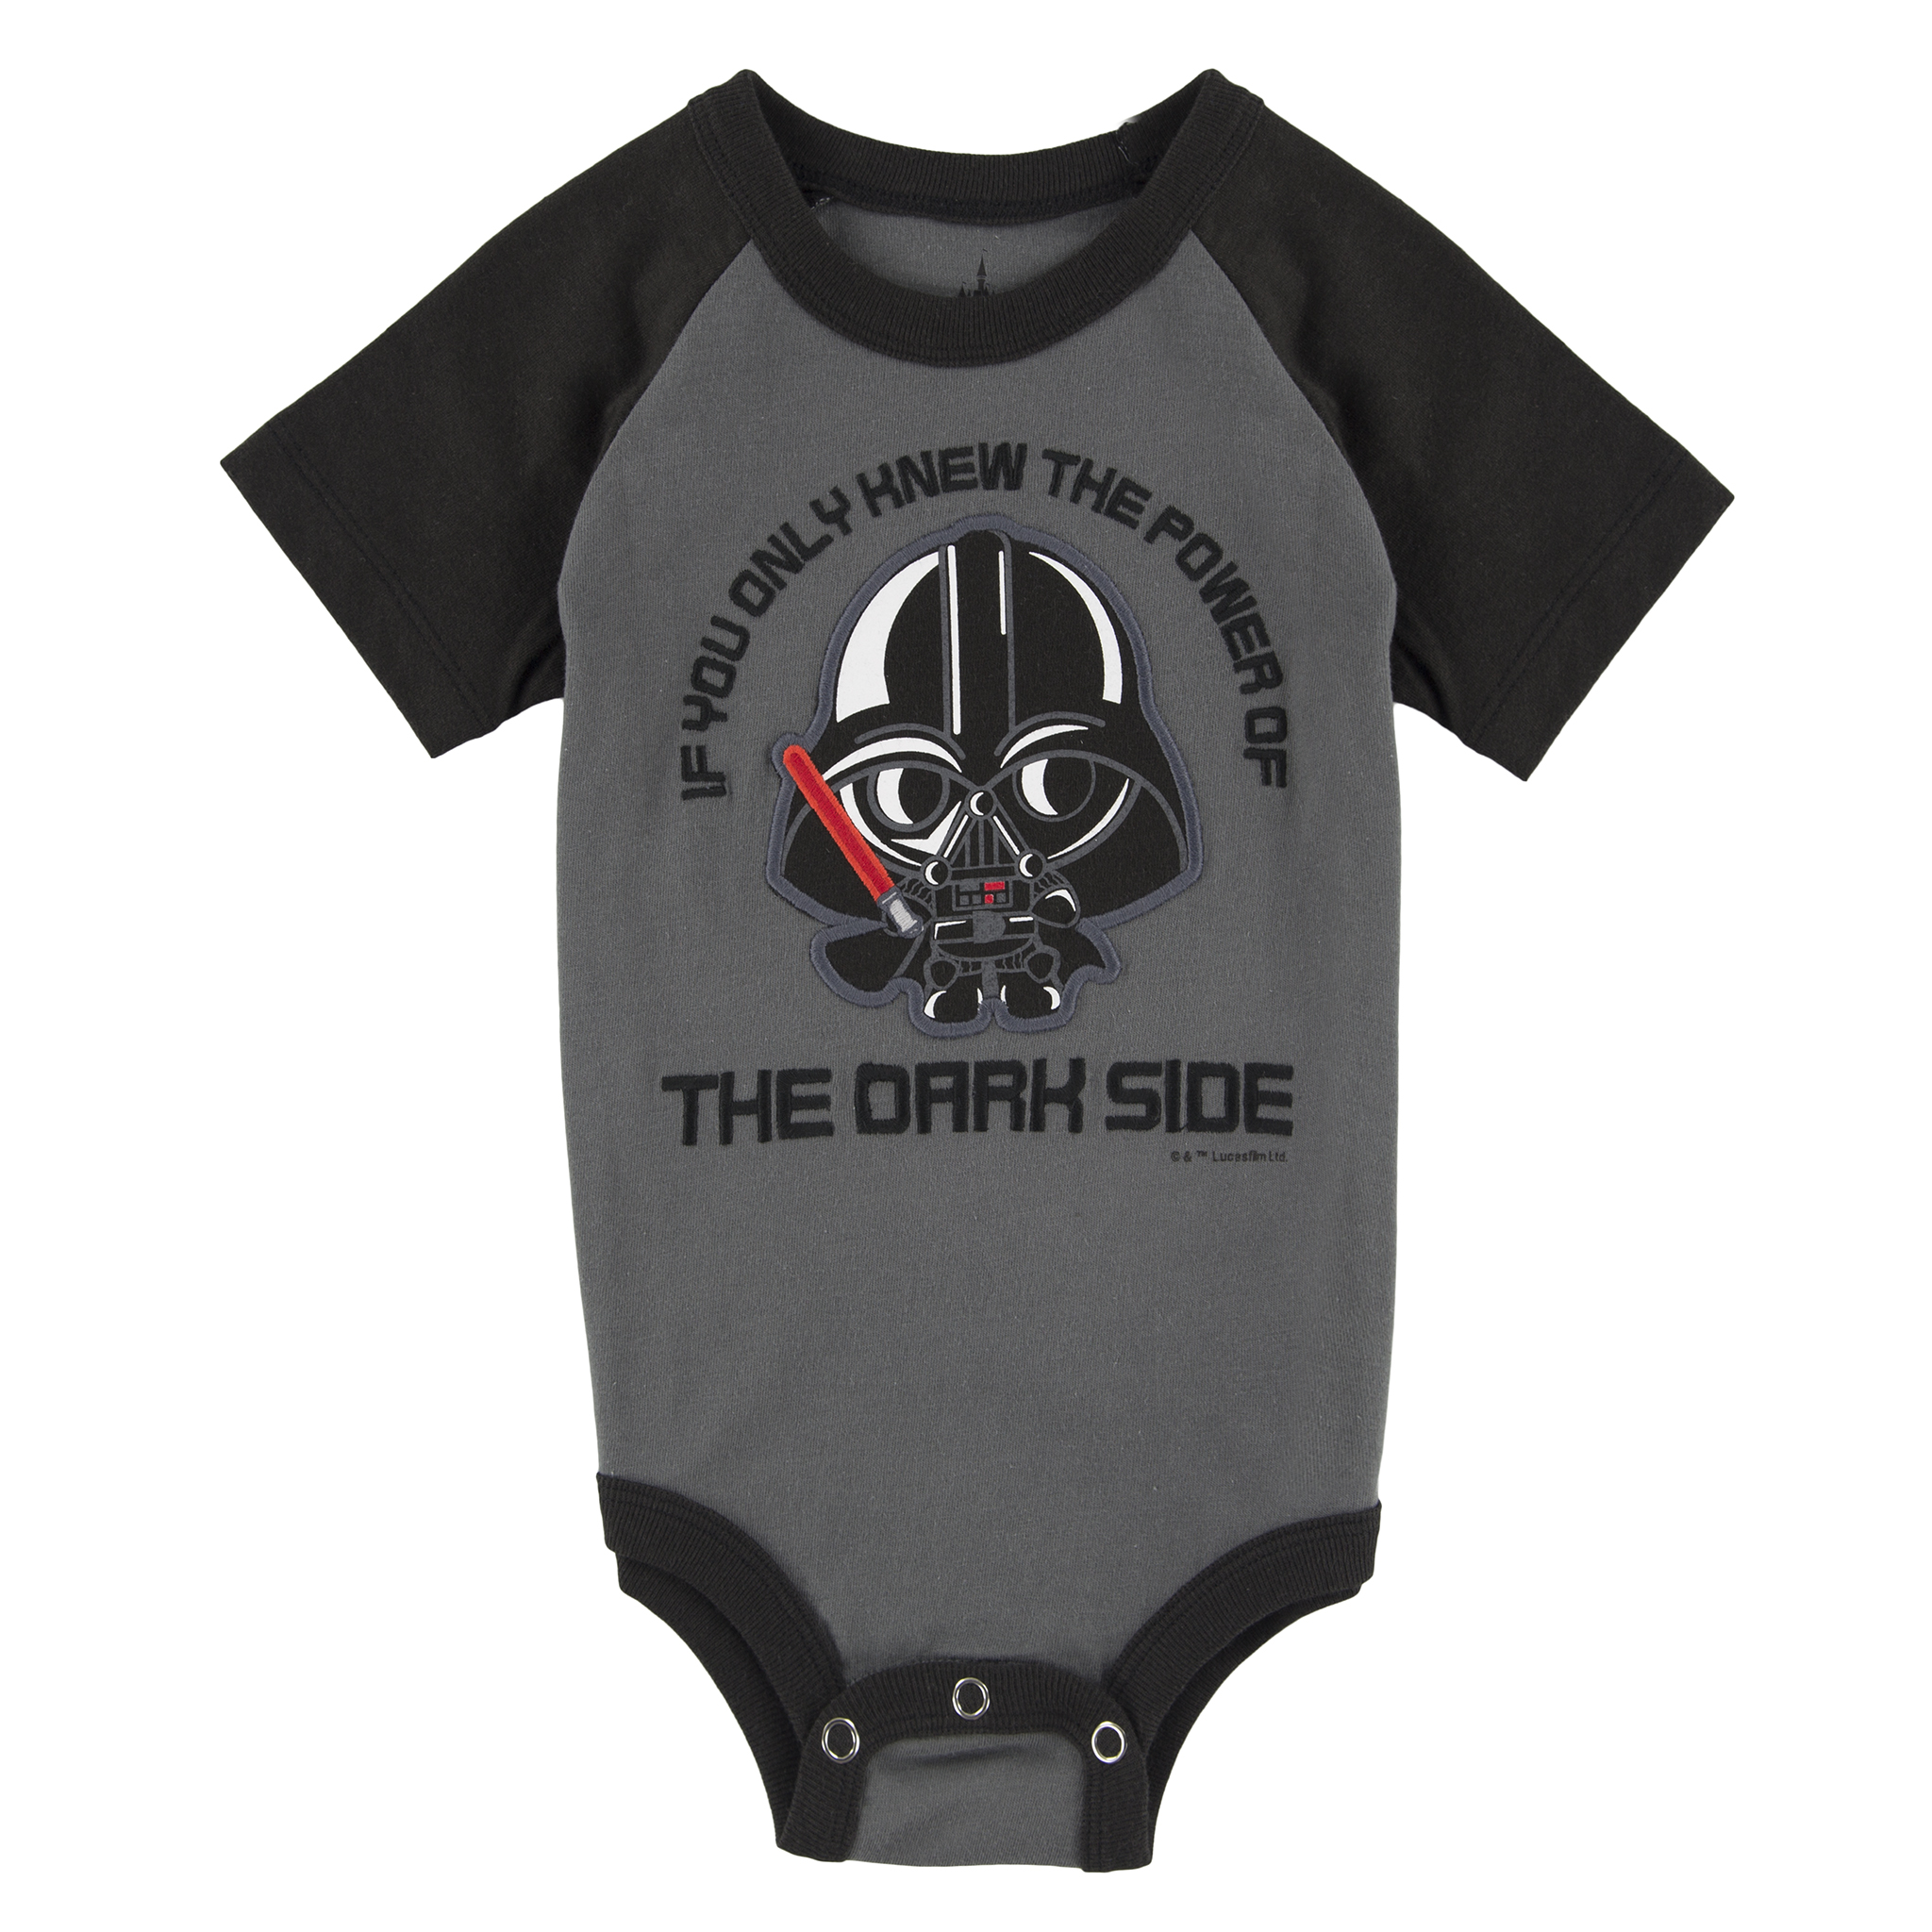 Darth Vader Baby Outfits Recalled For Oddly Appropriate Reason